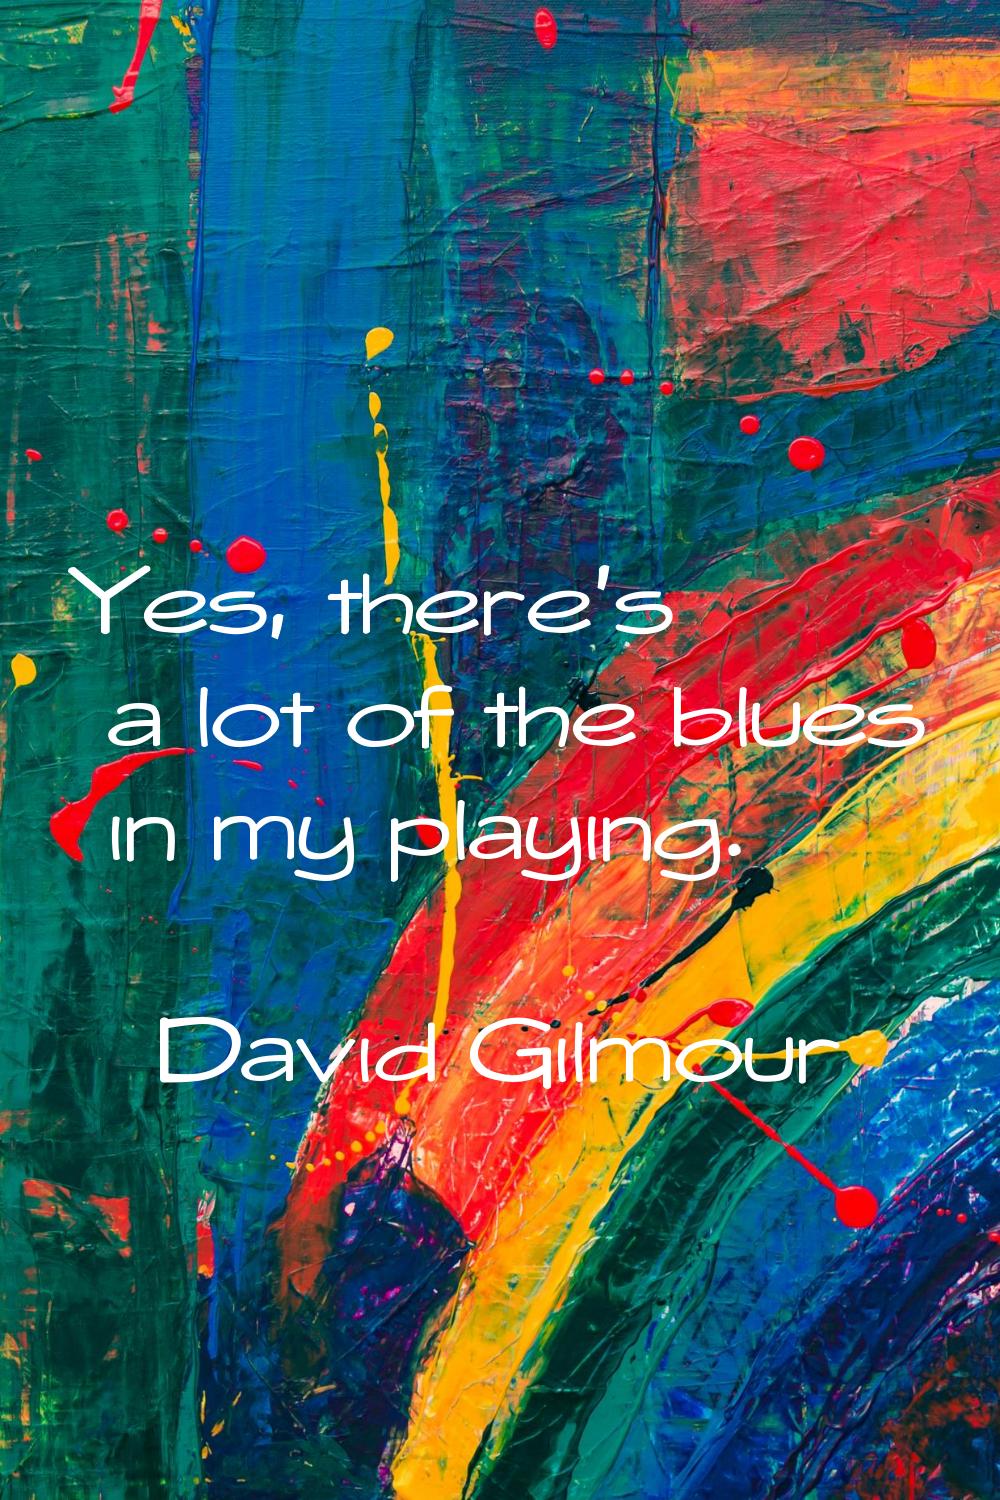 Yes, there's a lot of the blues in my playing.